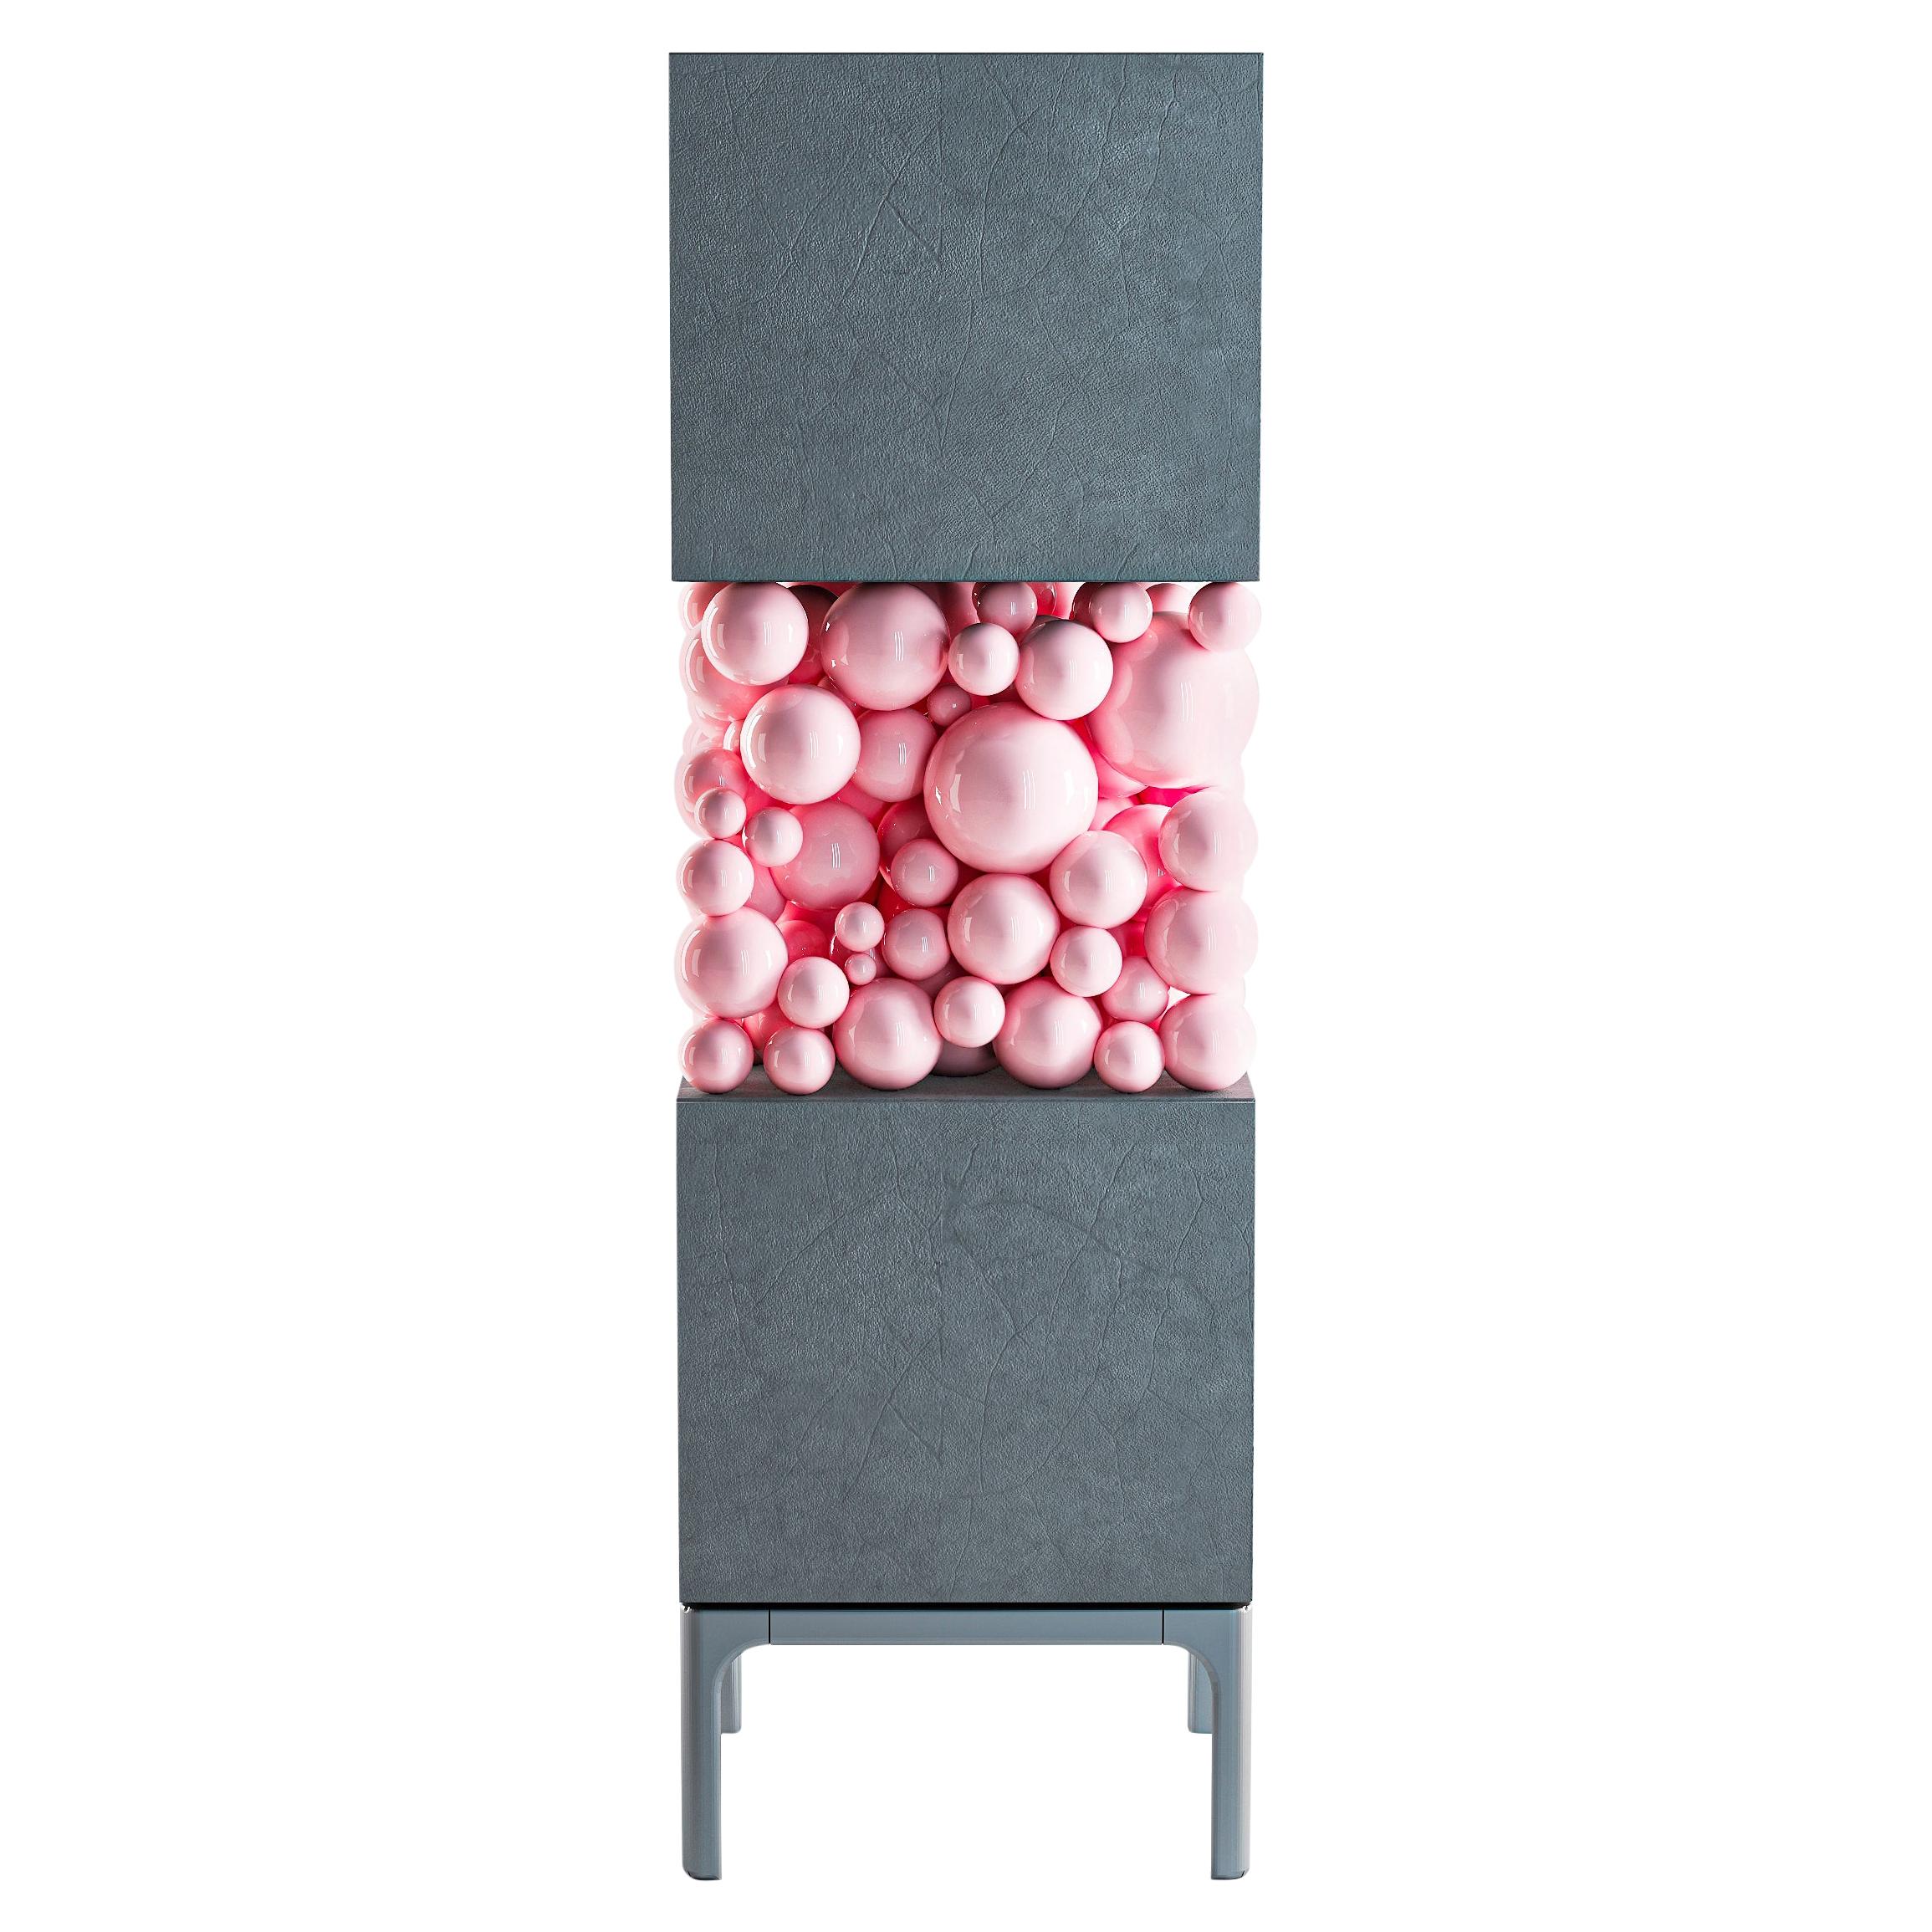 Wooden Gray Cabinet, Bubbles Collection, Amazing Emotional Design For Sale